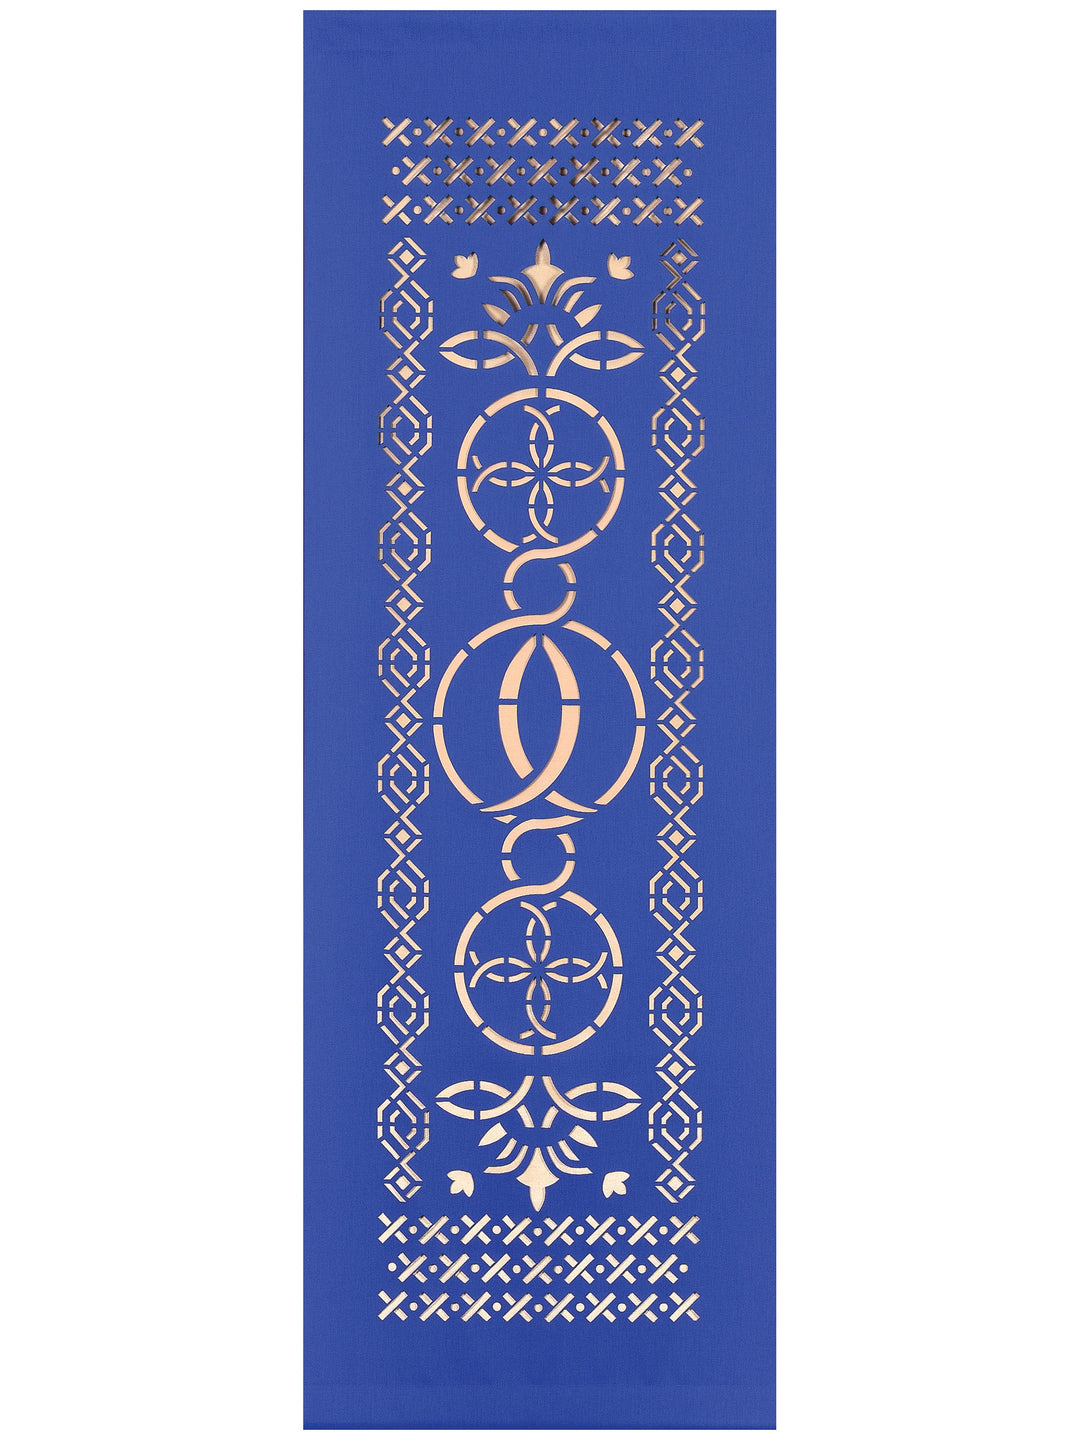 Ecclesiastical Banner sculpted with Fish Symbol on Blue, Green, Purple, Red or White Fabric